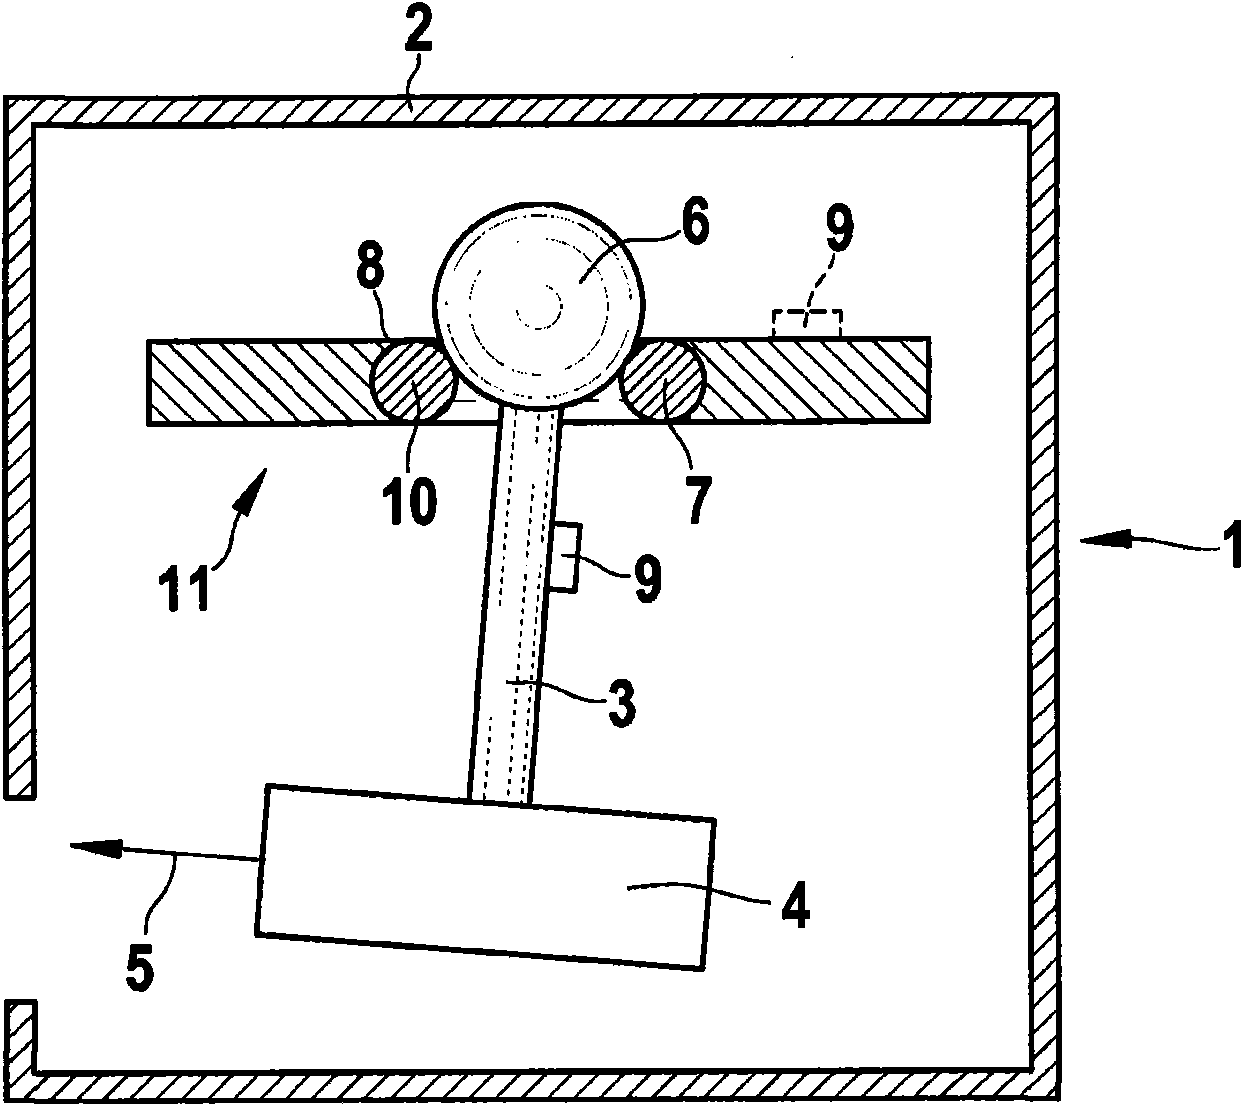 Marking and/or leveling device